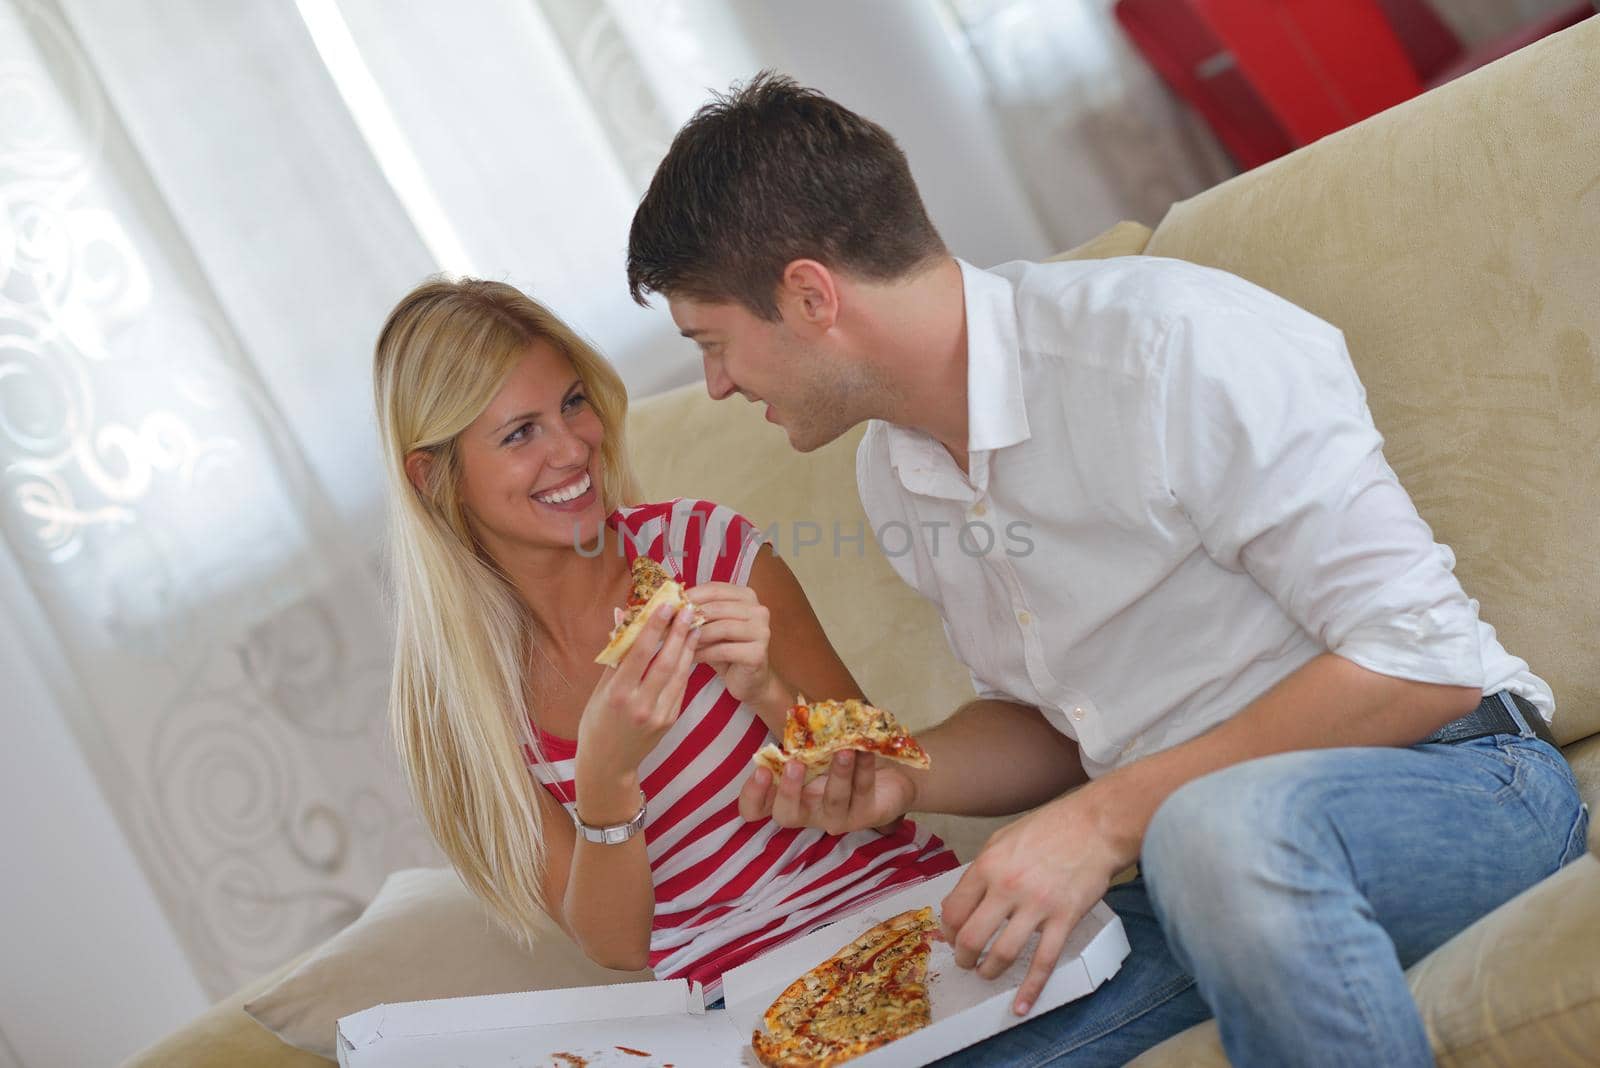 couple at home eating  pizza by dotshock